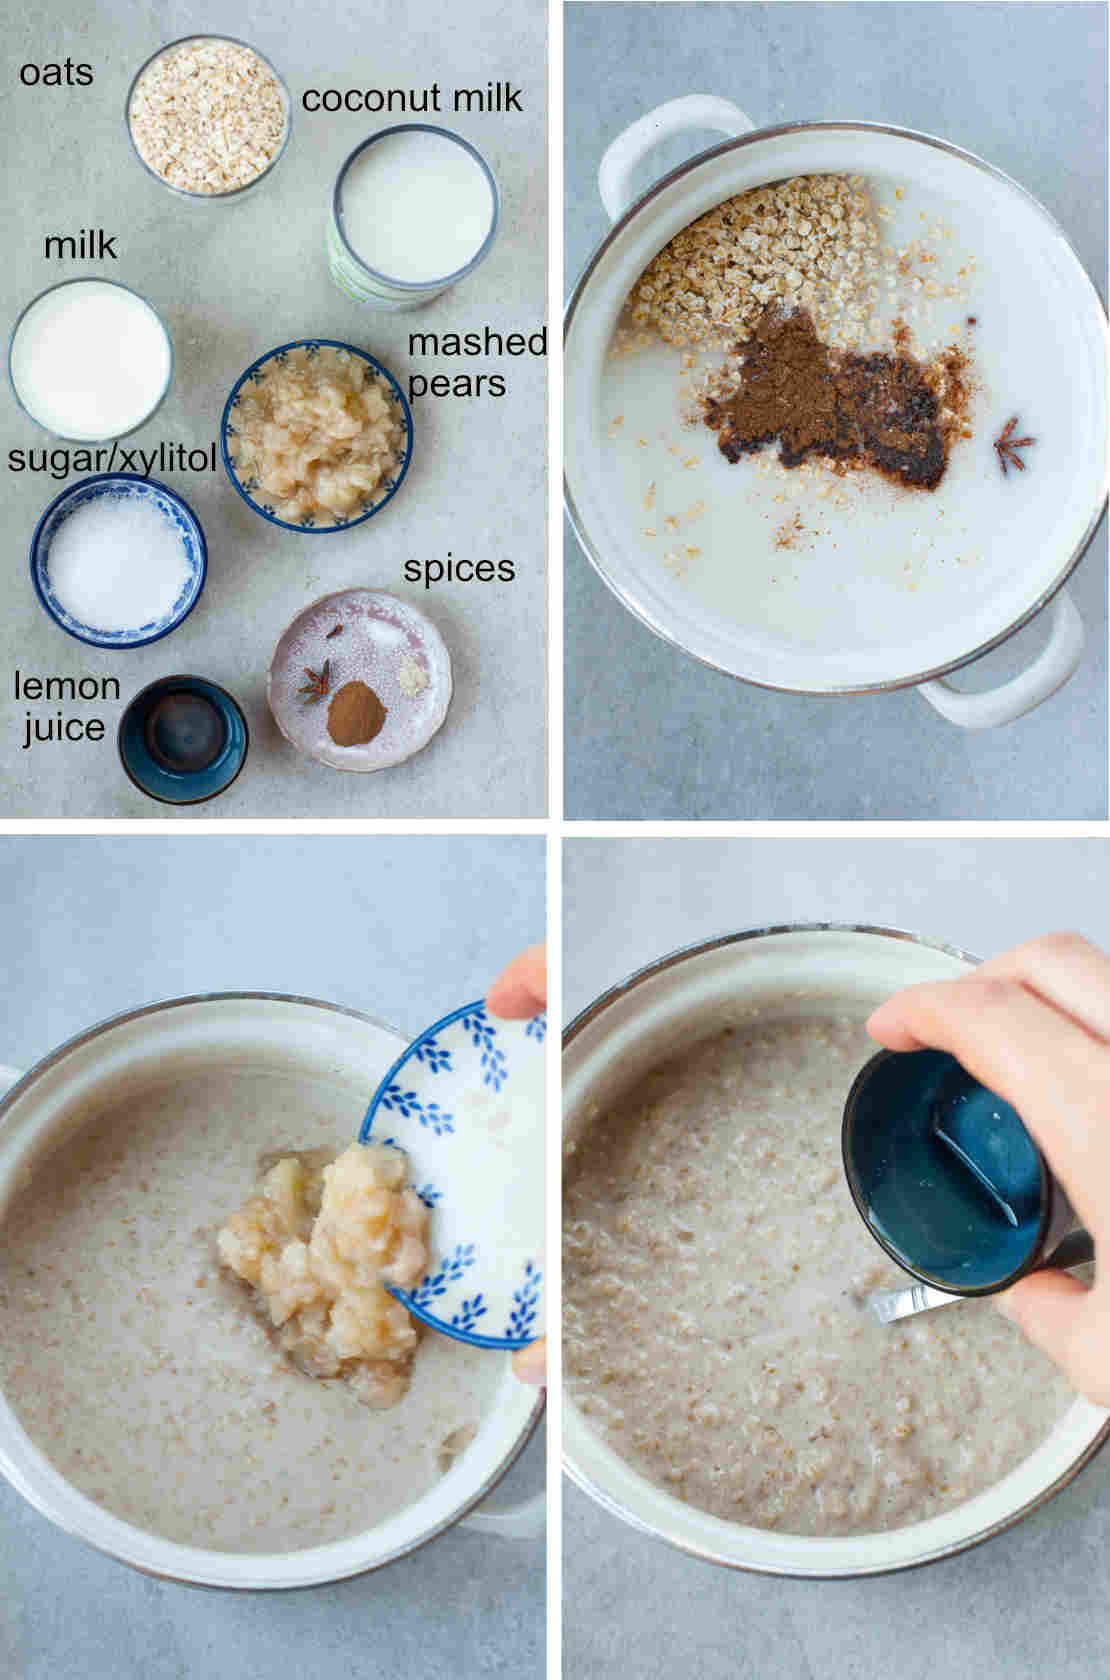 coconut oatmeal preparation steps and ingredients